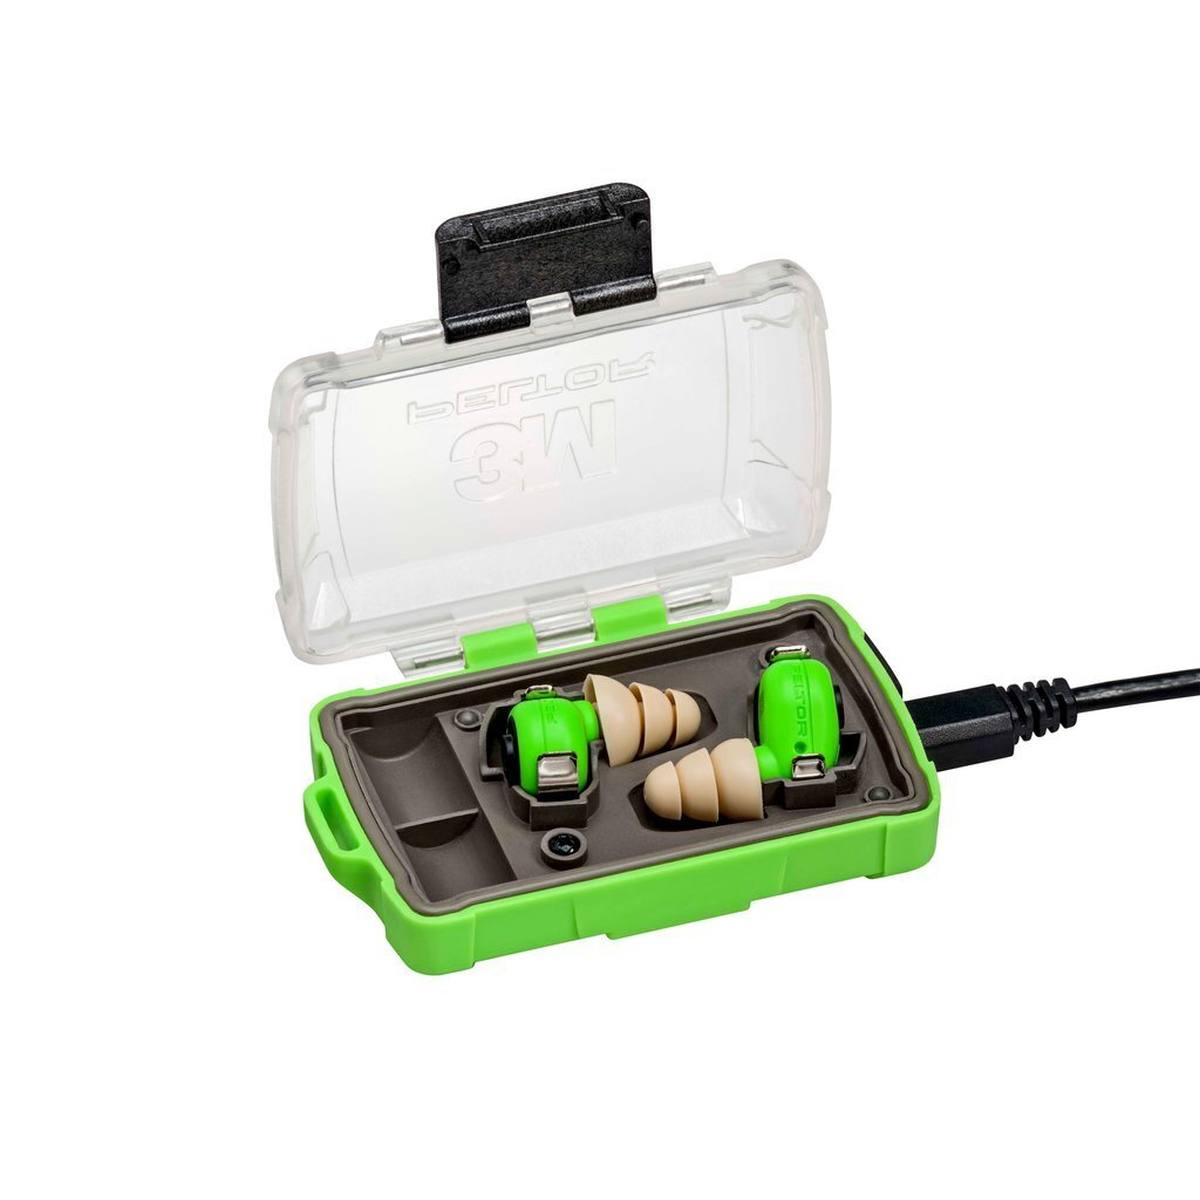 3M PELTOR EEP-100 EU electronic earplugs, set: earplugs and charging station (with closed lid and USB ports) are IP-54 rated and waterproof